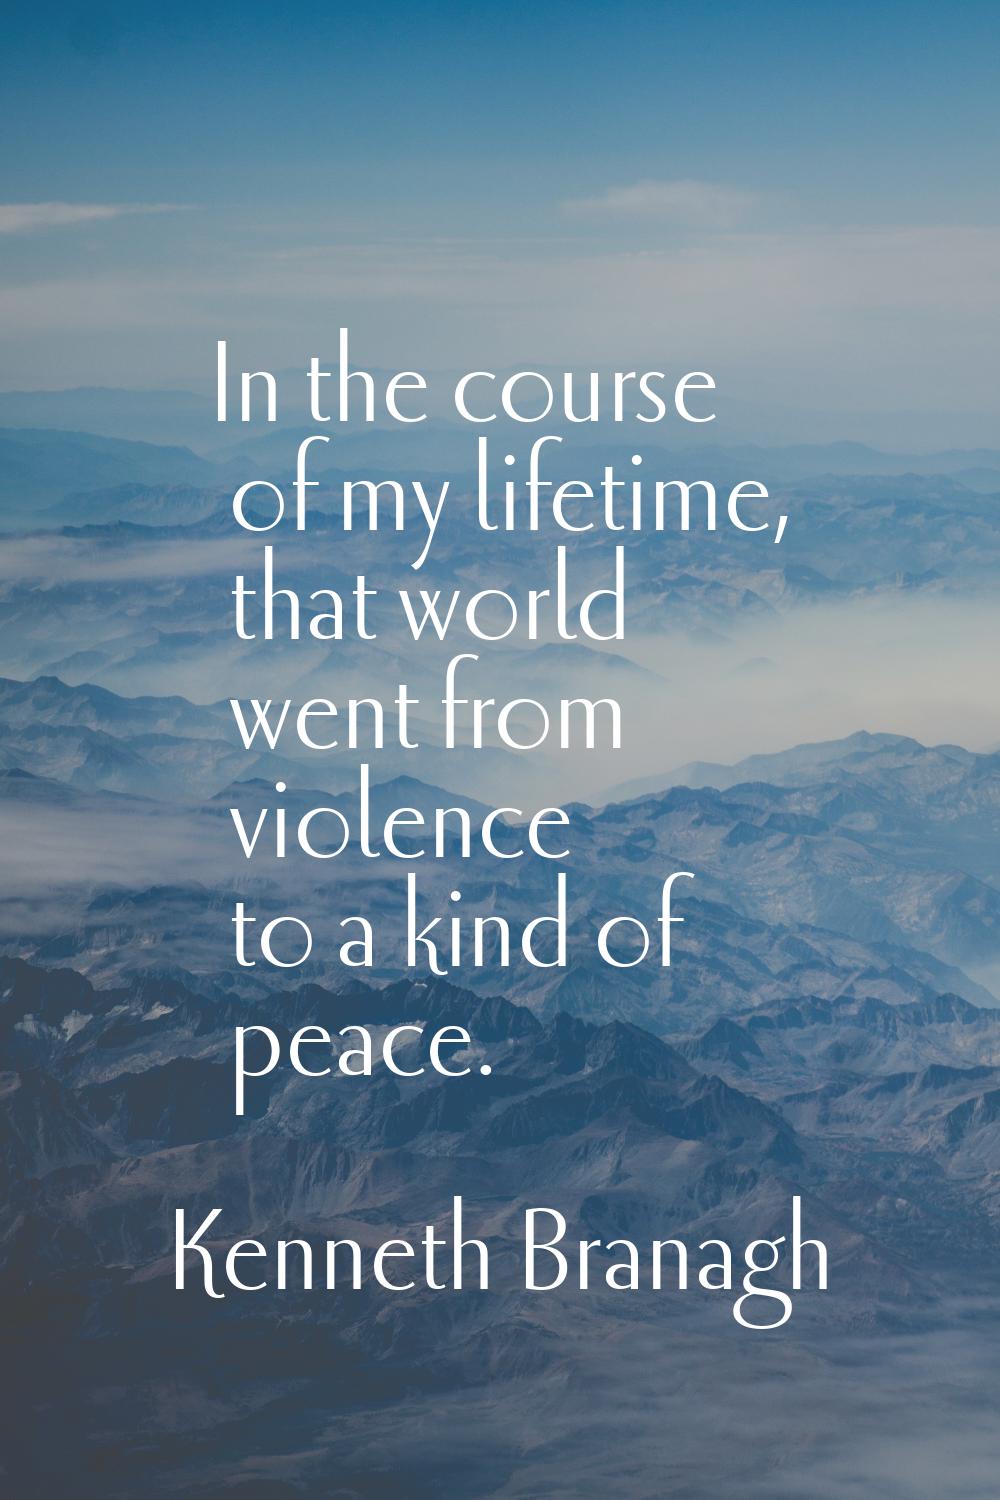 In the course of my lifetime, that world went from violence to a kind of peace.